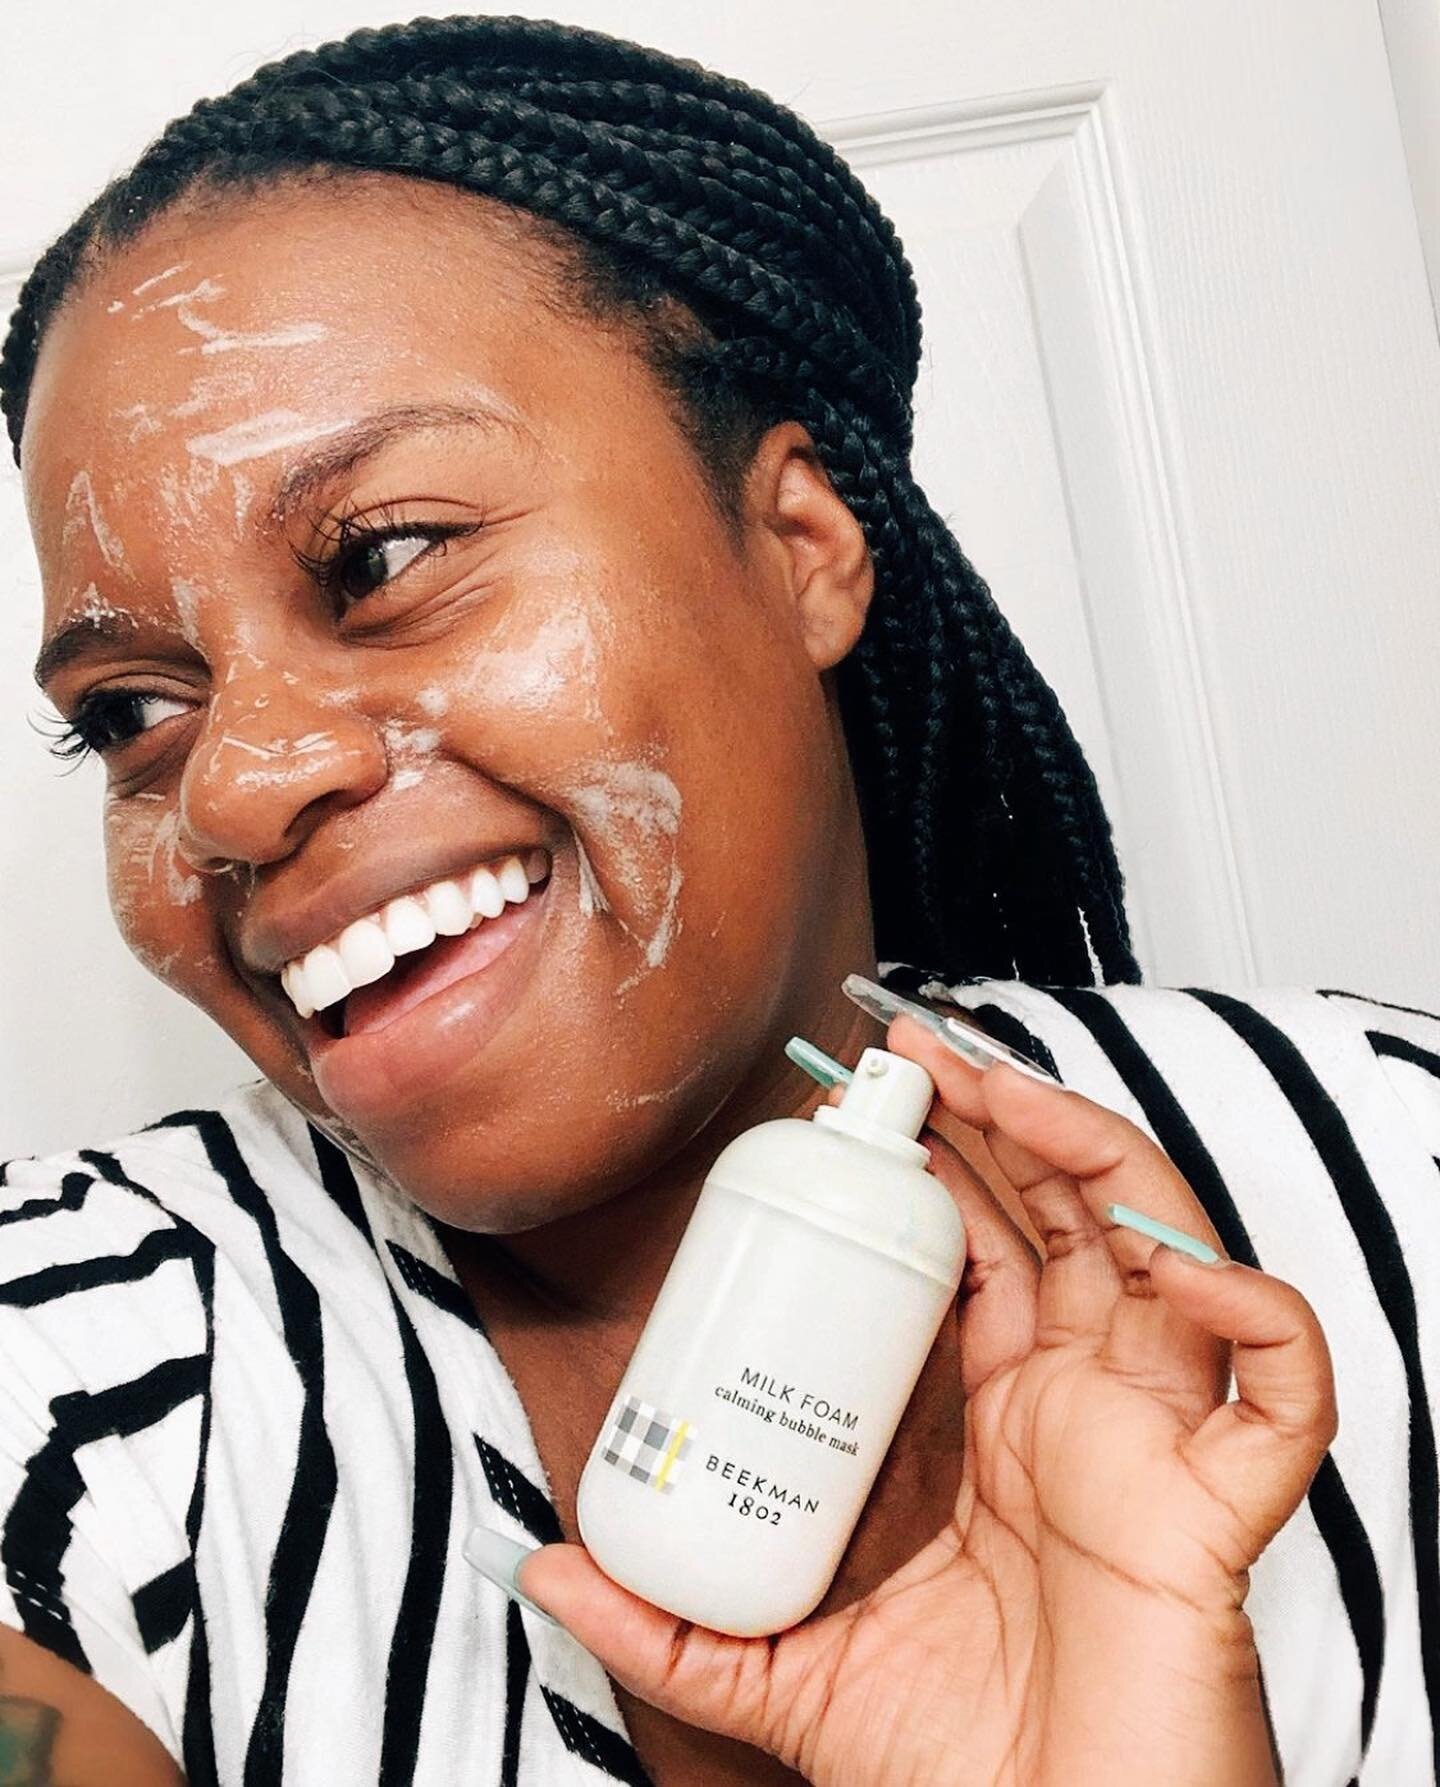 How radiant does Shenika&rsquo;s skin look using @beekman1802&rsquo;s milk foam calming bubble mask?! 🥰

Oxygen bubbles, an active botanical blend, and their proprietary triple milk complex help to instantly calm, soothe and hydrate 🌿

@shades_of_b